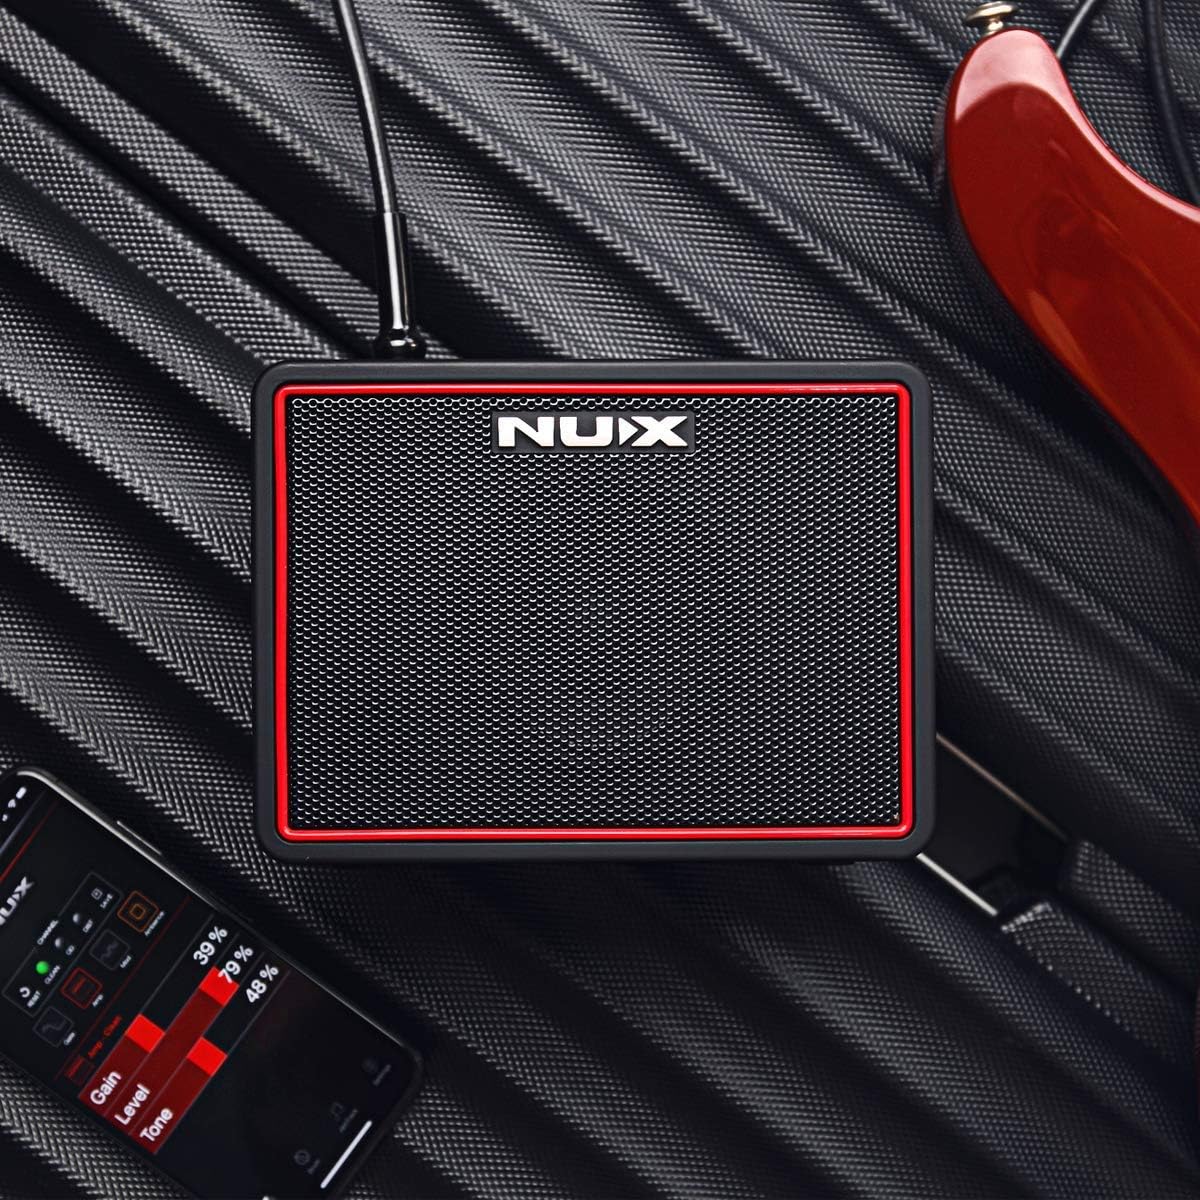 NUX Mighty Lite BT Mini Portable Modeling Guitar Amplifier with